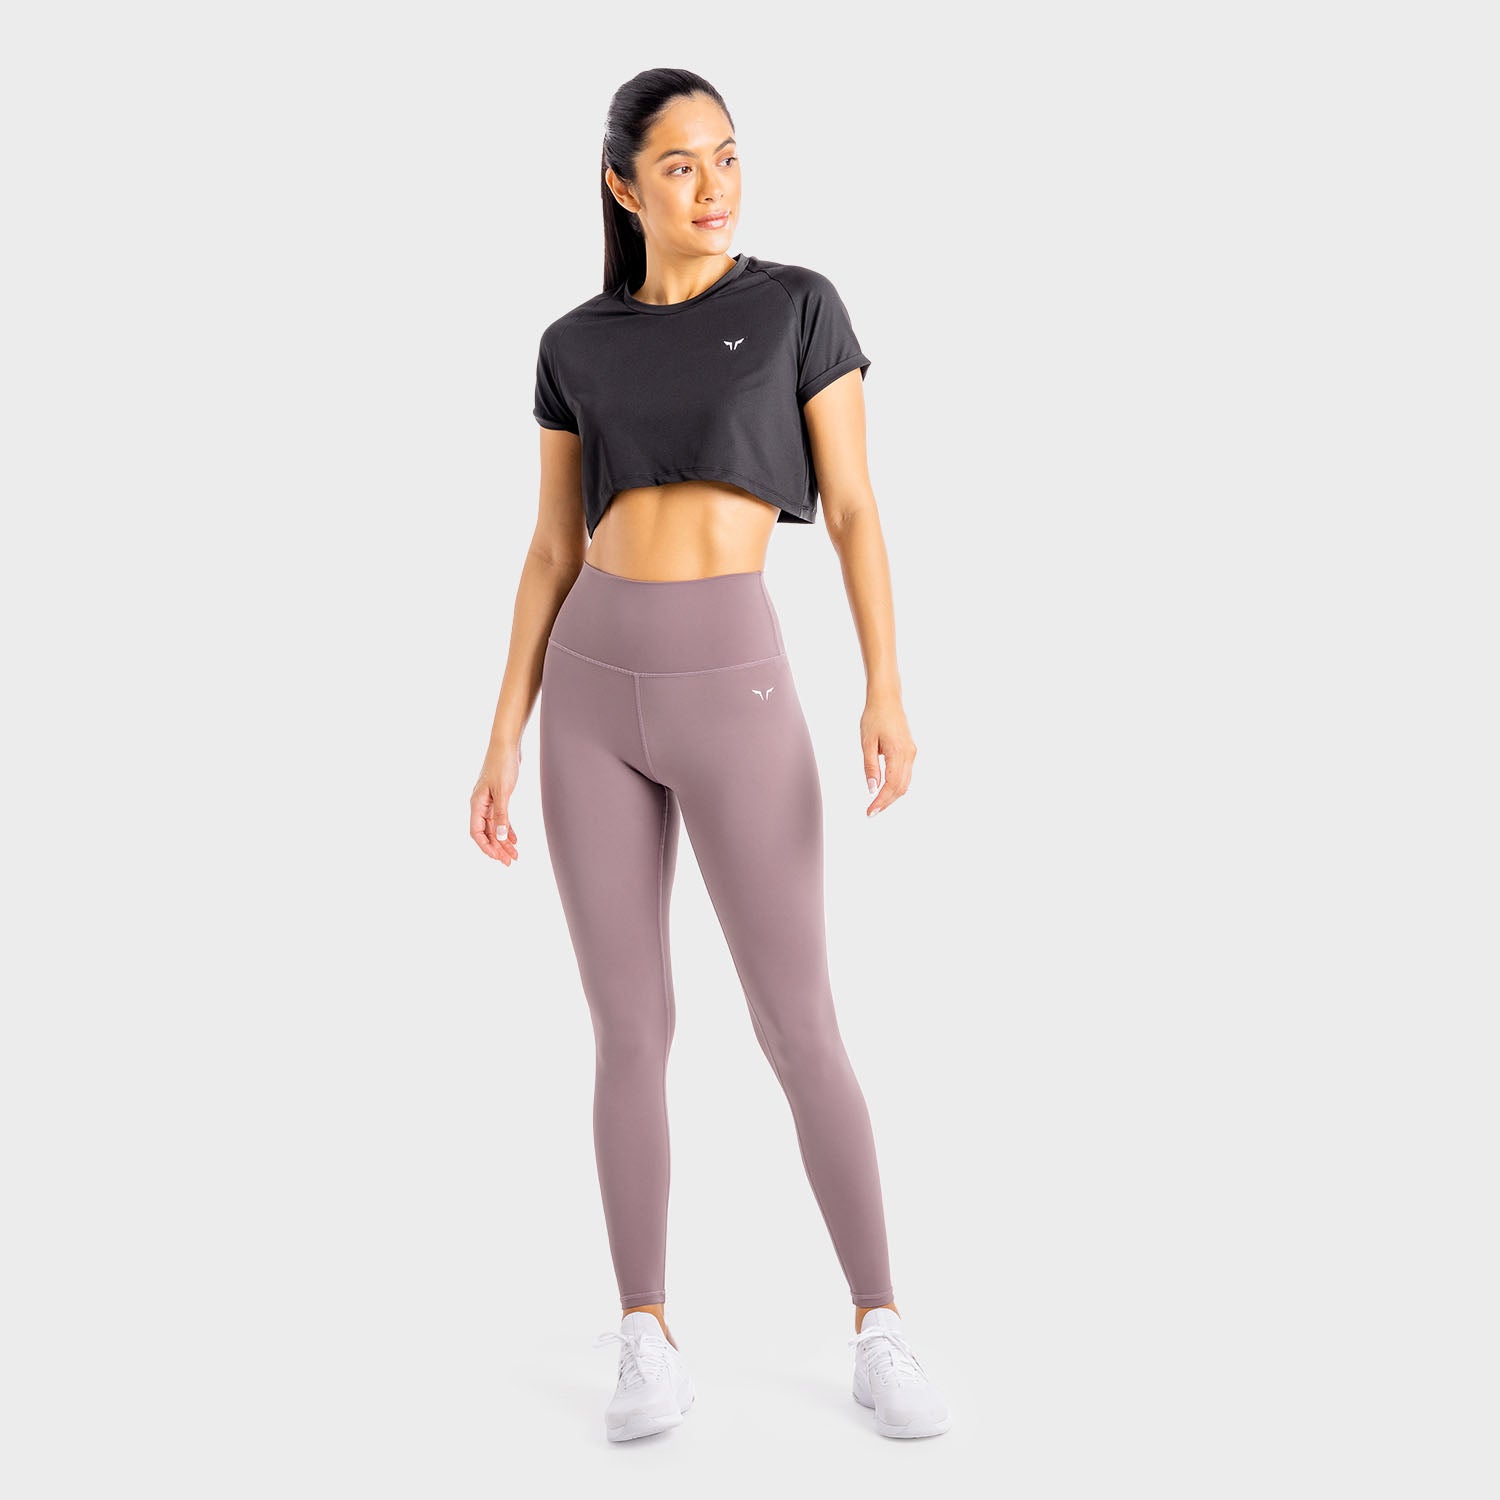 squatwolf-workout-clothes-core-agile-leggings-clay-gym-leggings-for-women